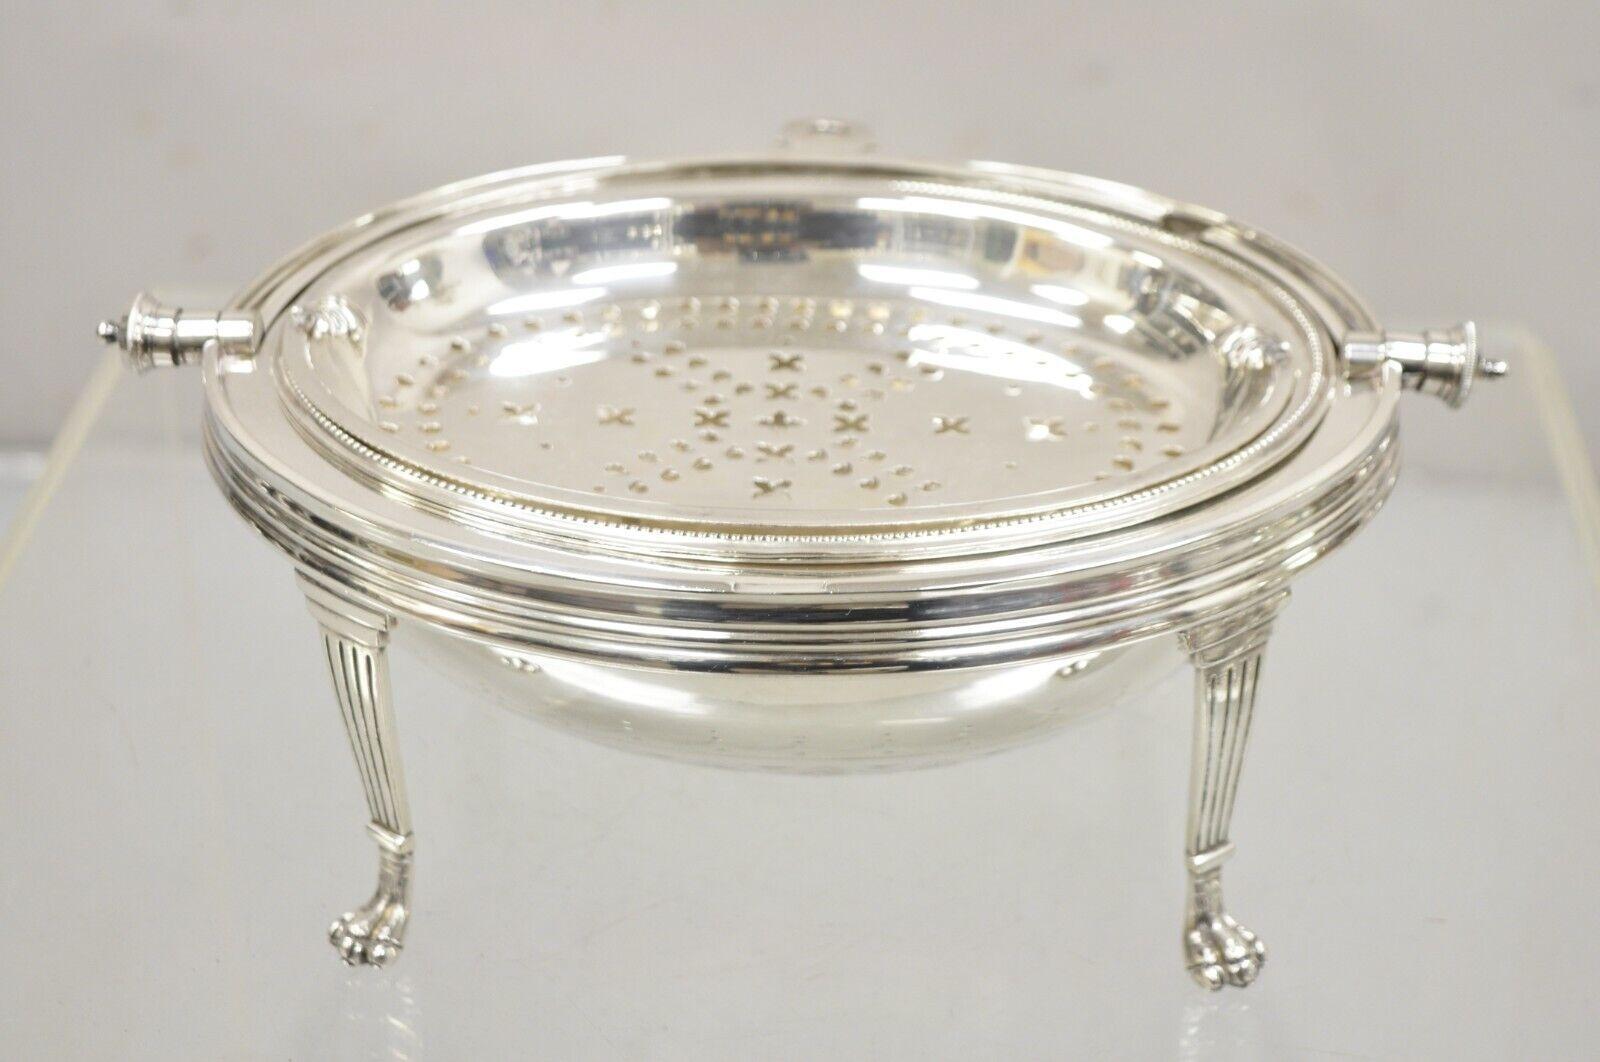 English Regency Victorian Silver Plated Revolving Dome Chafing Dish Warmer For Sale 2